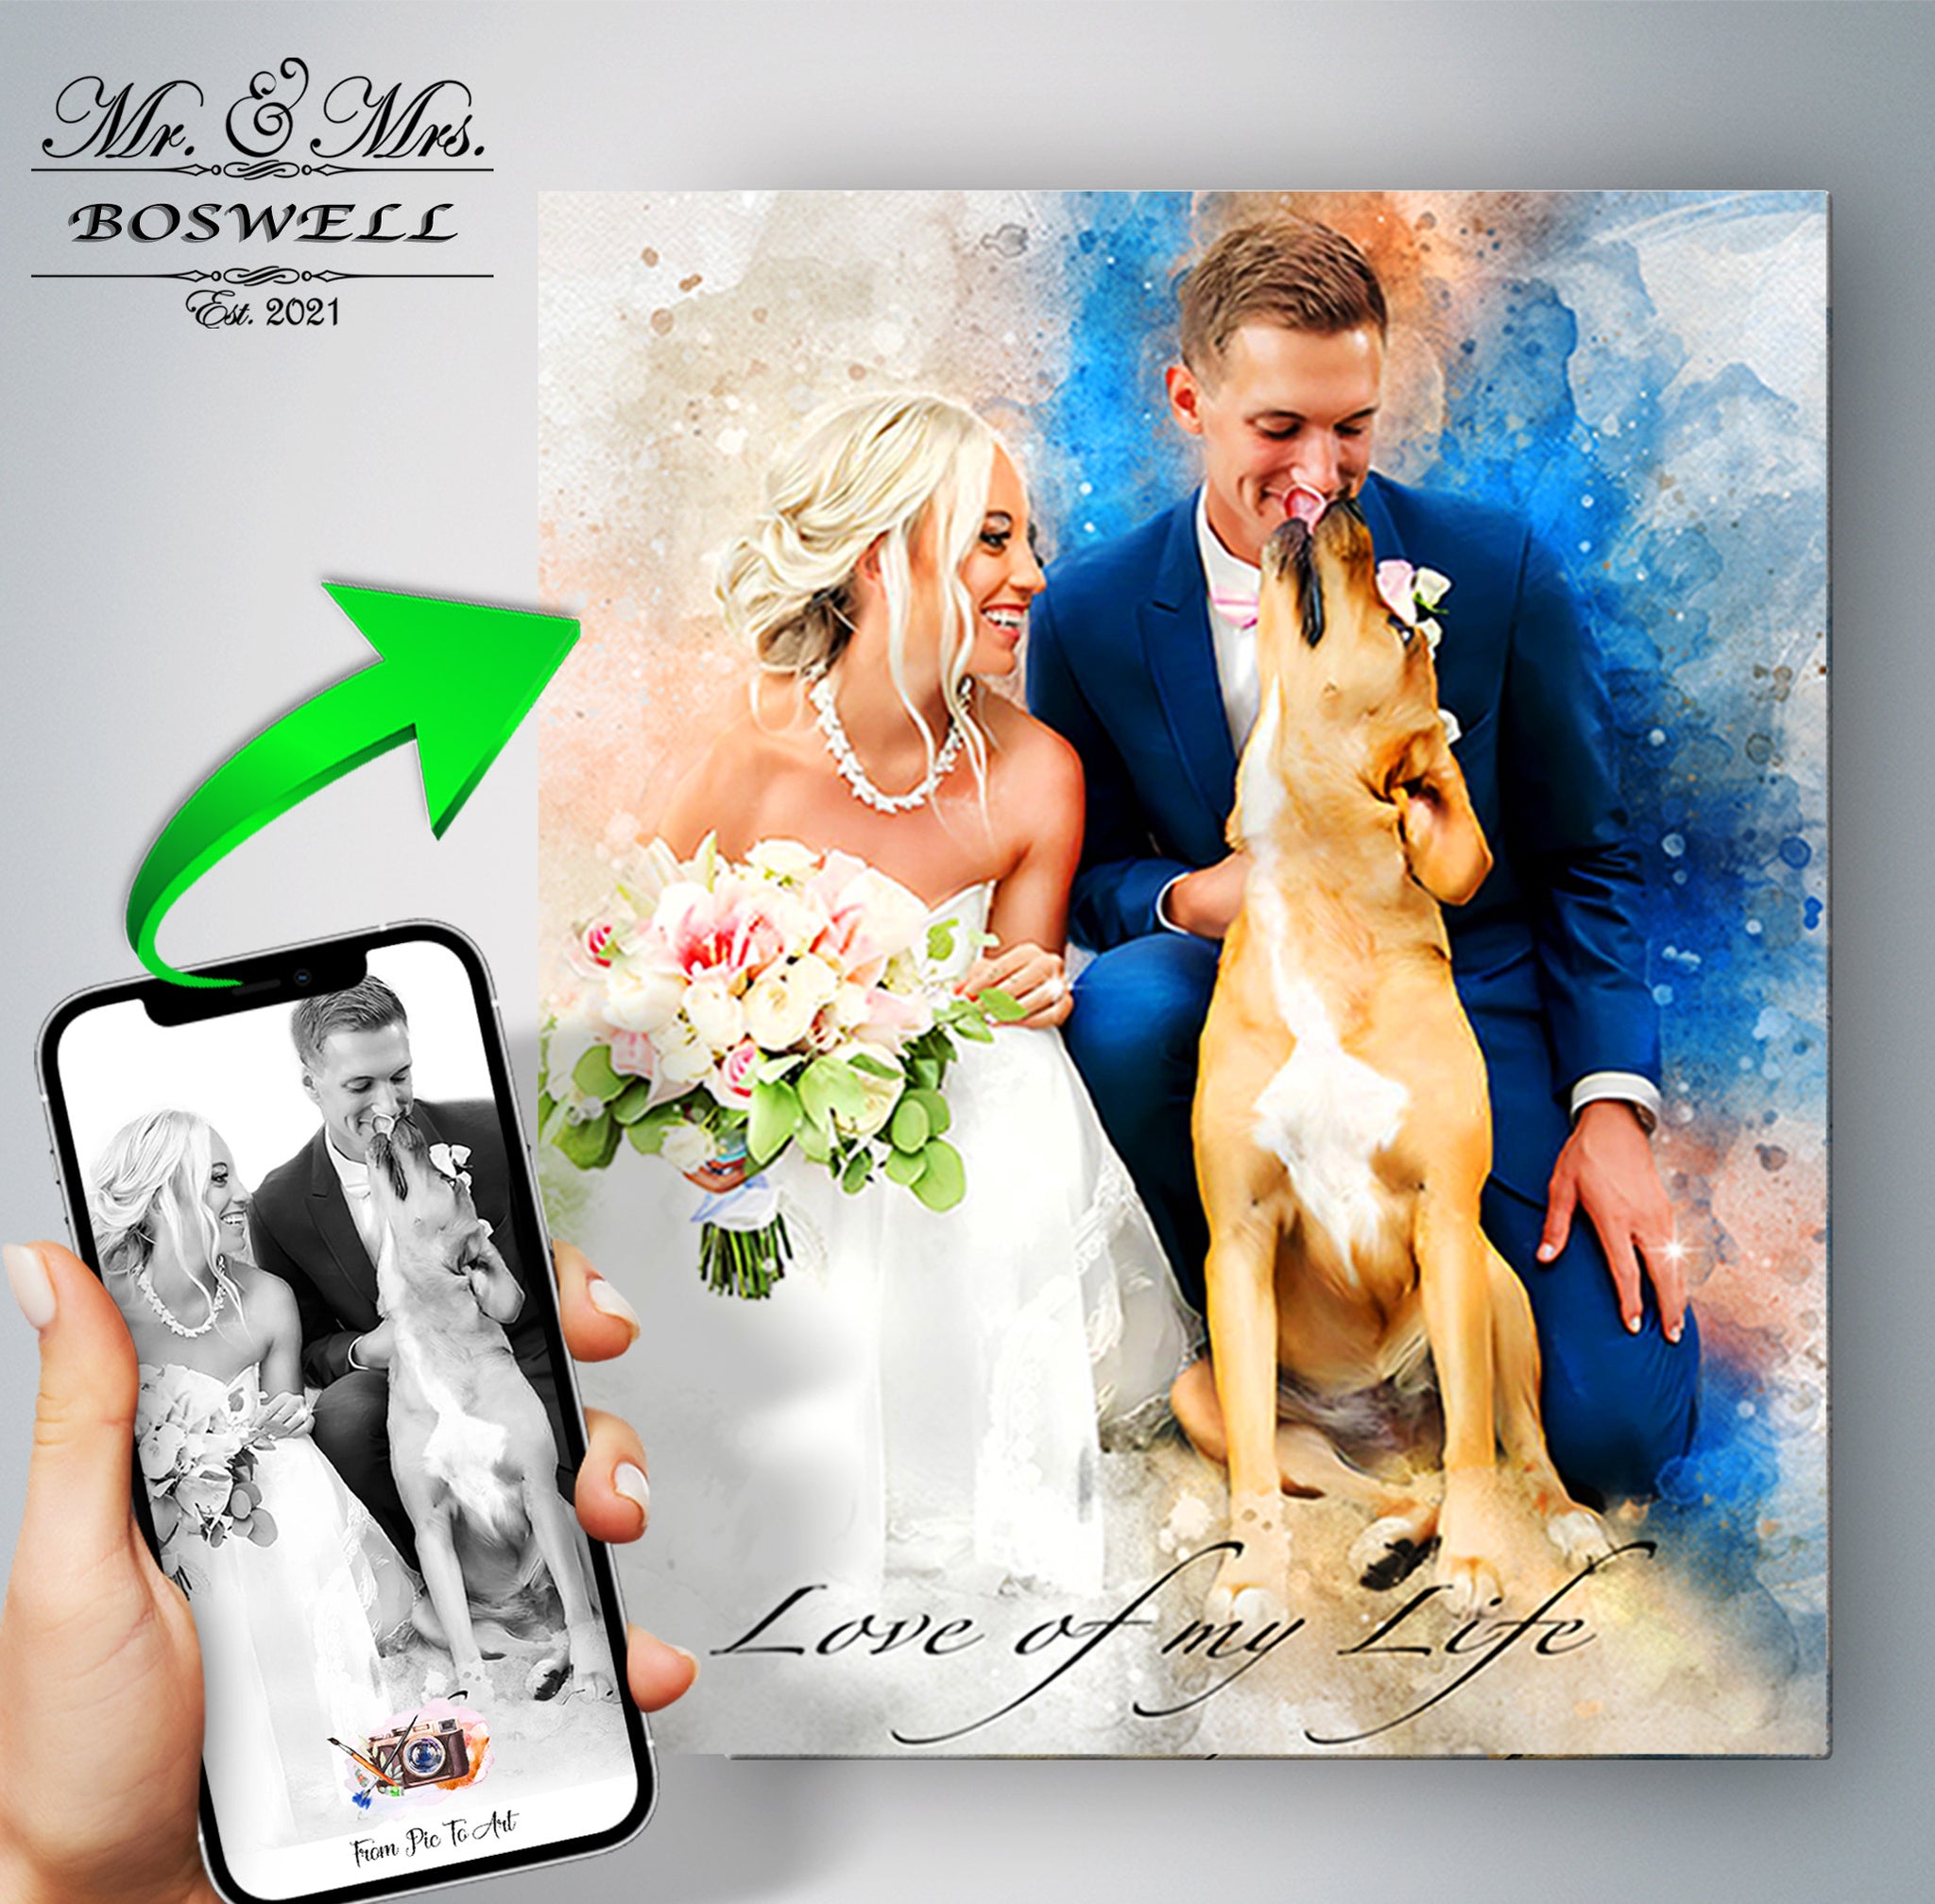 Custom Painting from Photo, Personalized Wedding Painting, Family Portrait Painting, Painted Couple Portrait on Canvas, Wedding with dog- FrompictoArt